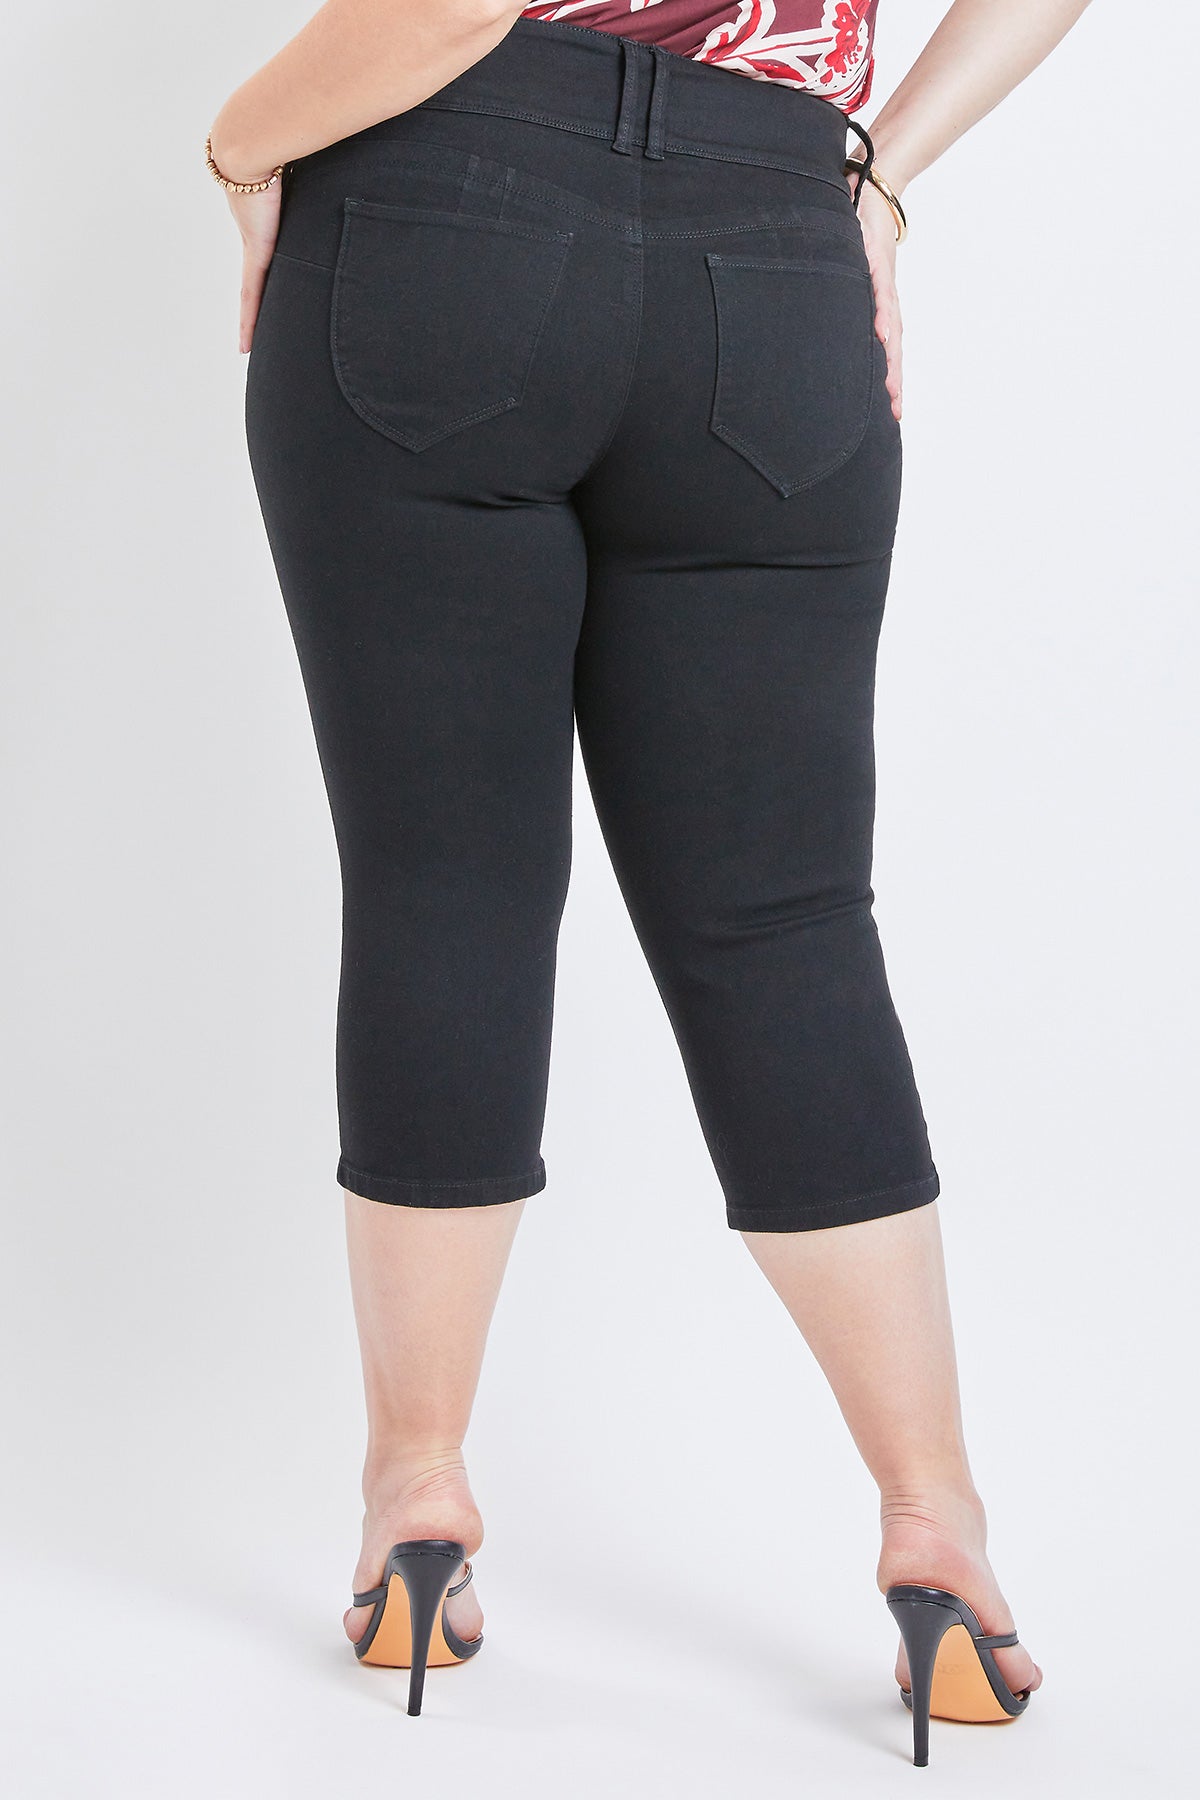 Missy Plus Size Wannabettabutt 3-Button Capri Made With Recycled Fibers Pack Of 12